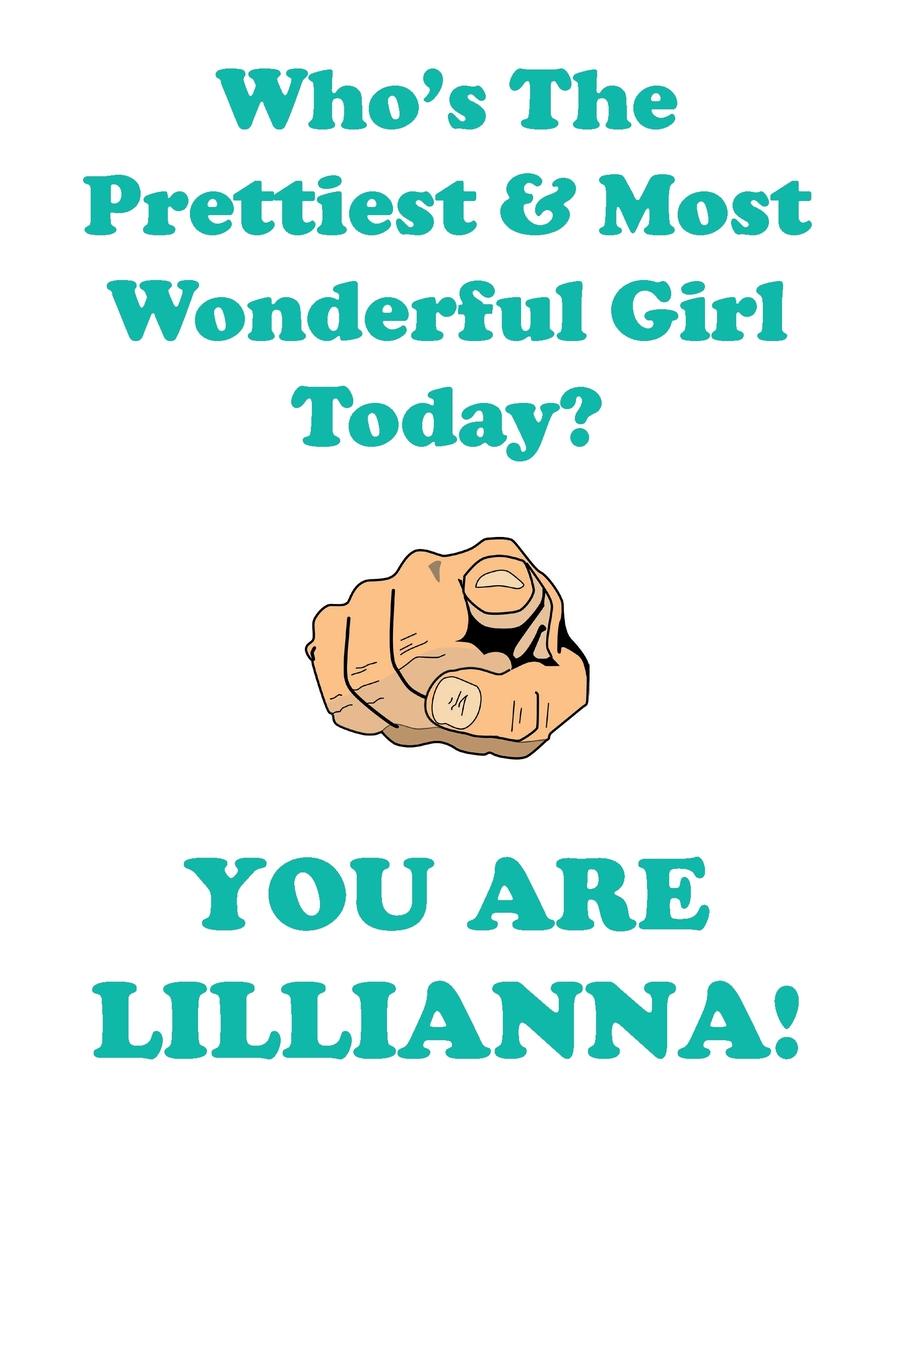 LILLIANNA is The Prettiest Affirmations Workbook Positive Affirmations Workbook Includes. Mentoring Questions, Guidance, Supporting You